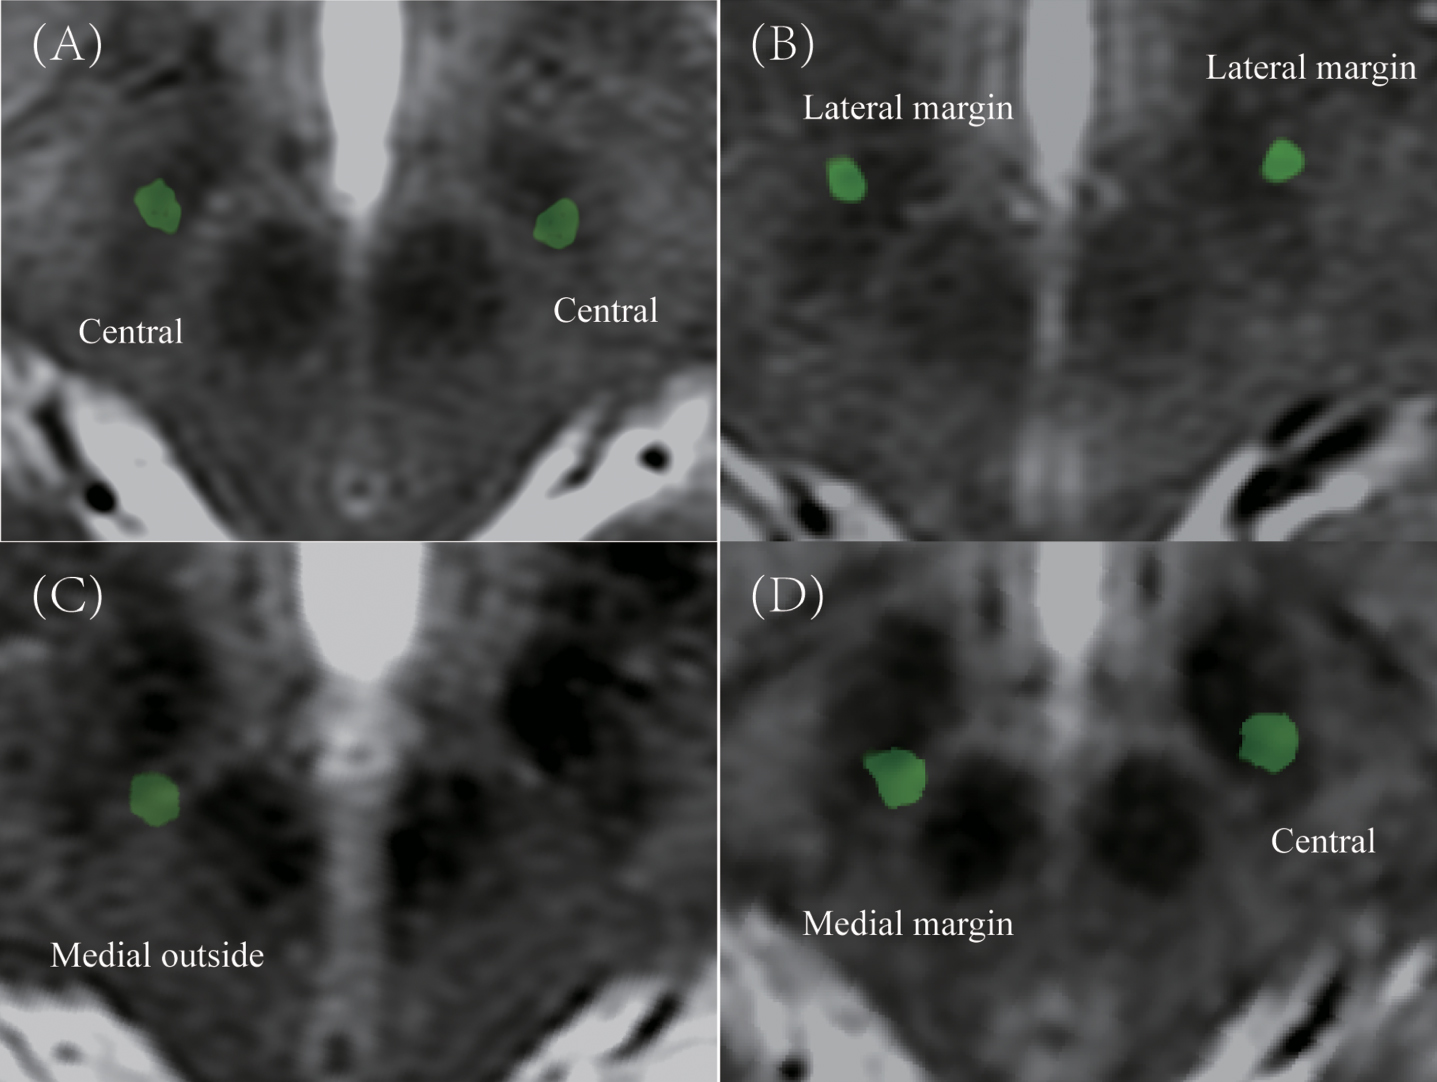 The example of classification in postoperative electrodes position in STN region. A) Central in bilateral STN. B) Lateral margin in bilateral STN. C) Medial outside in right STN. D) Medial margin in right STN and central in left STN.